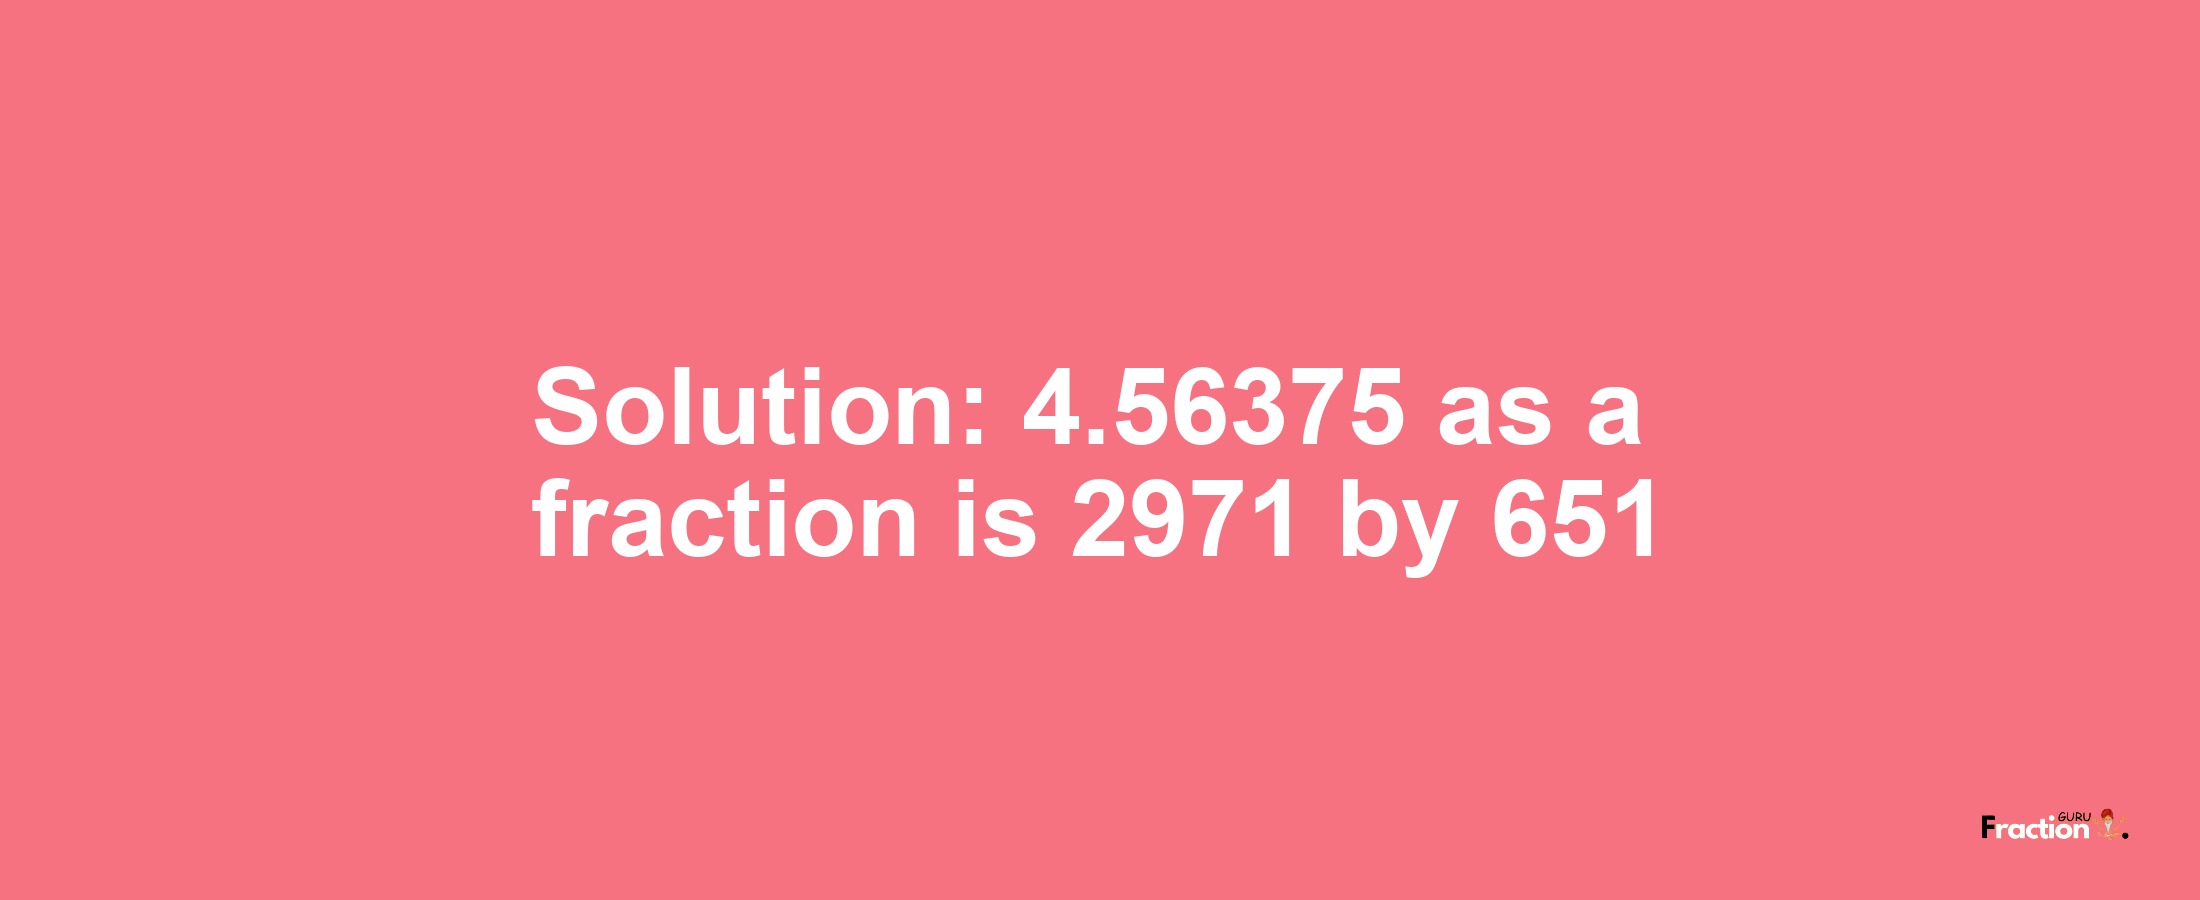 Solution:4.56375 as a fraction is 2971/651